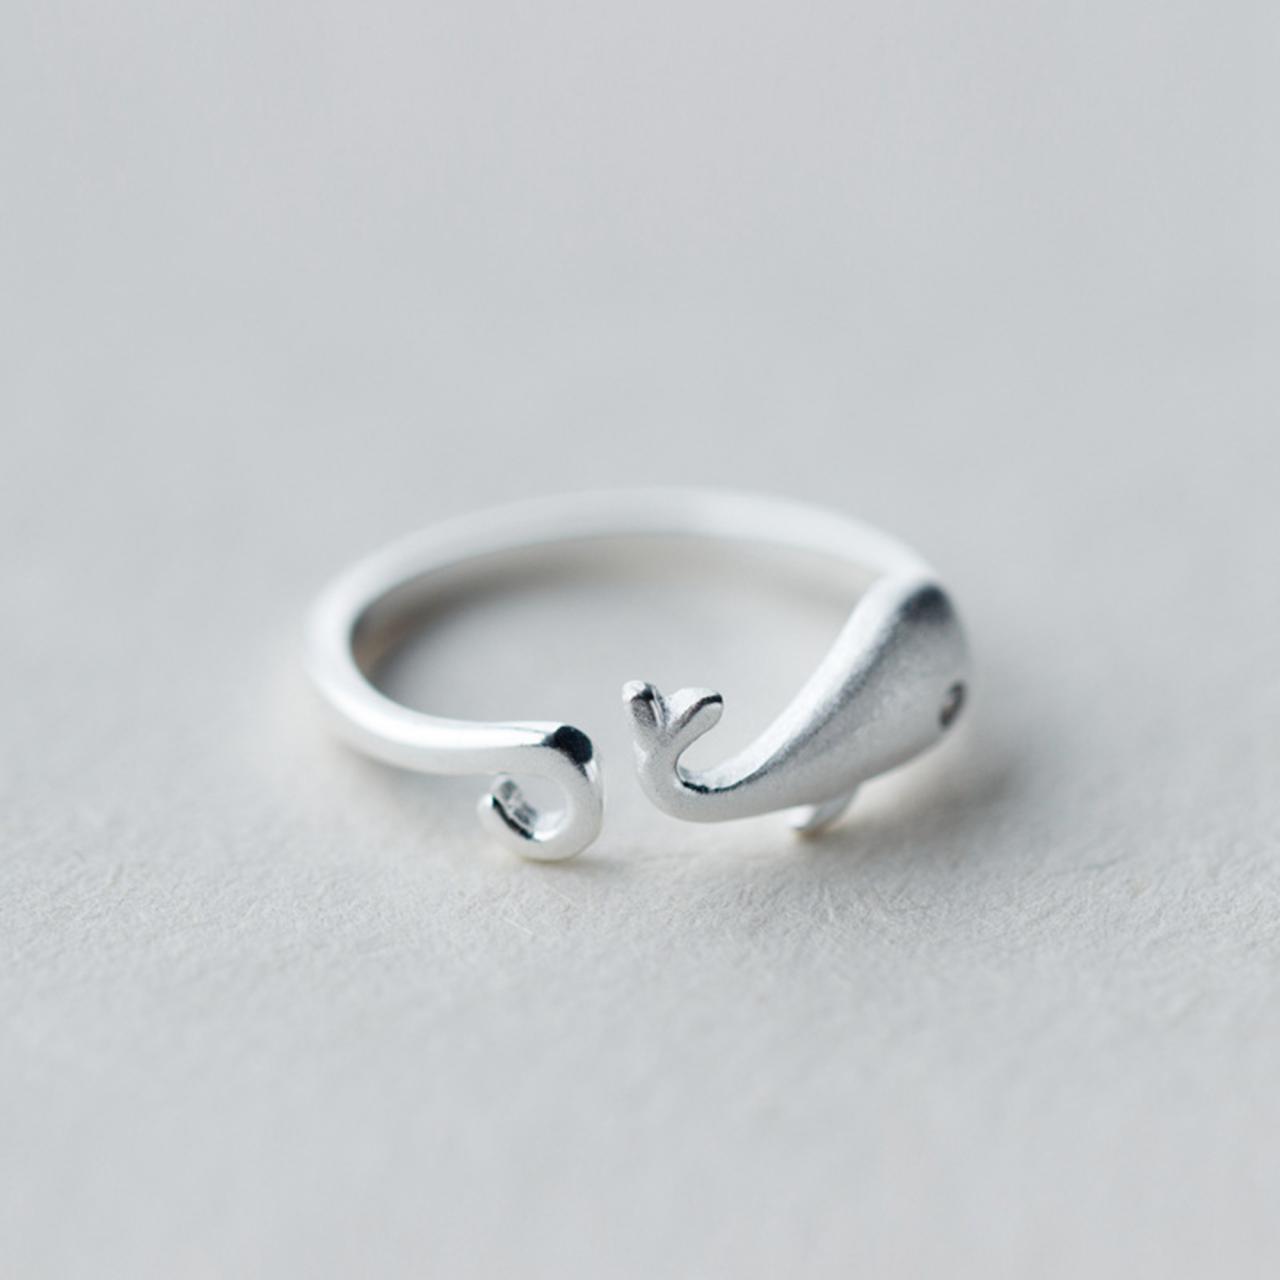 Filigree Dolphin Ring, Sterling Silver Adjustable Dolphin Ring, Minimalist Rings, Dainty Ring, Women Ring, Everyday Jewelry, Cz Pave Ring